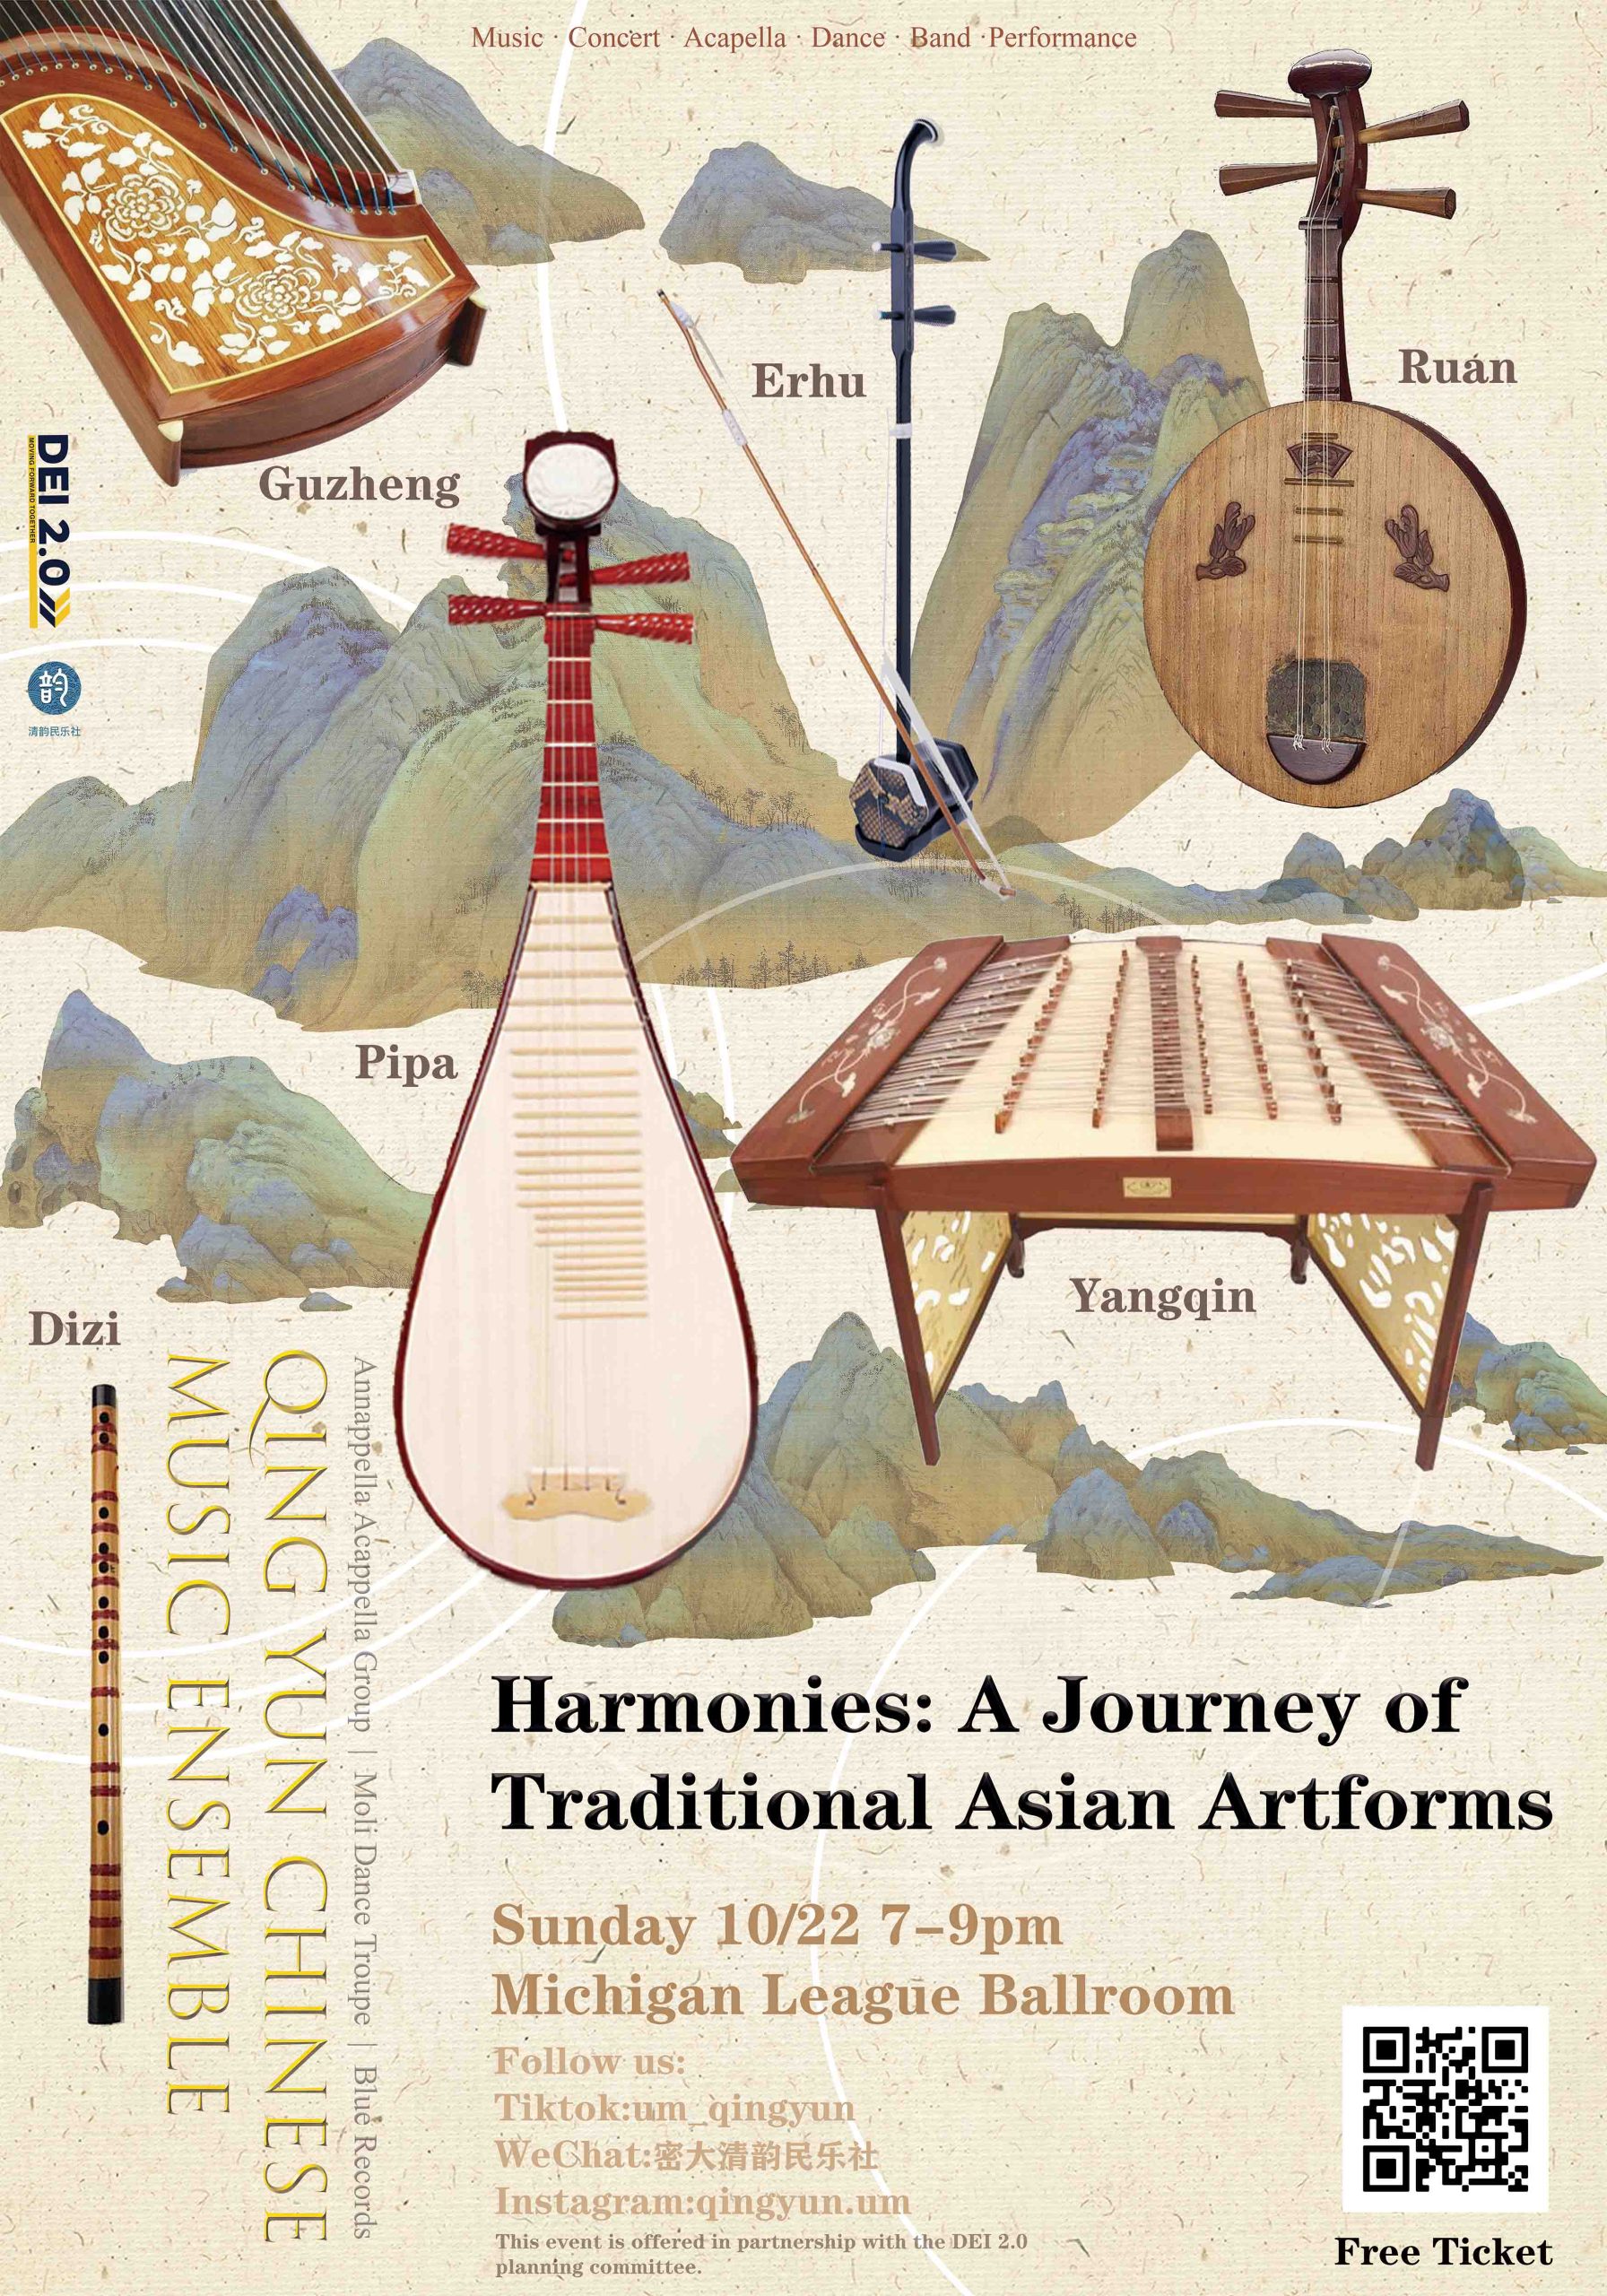 Poster for Oct 22 performance, picturing Asian instruments and event details